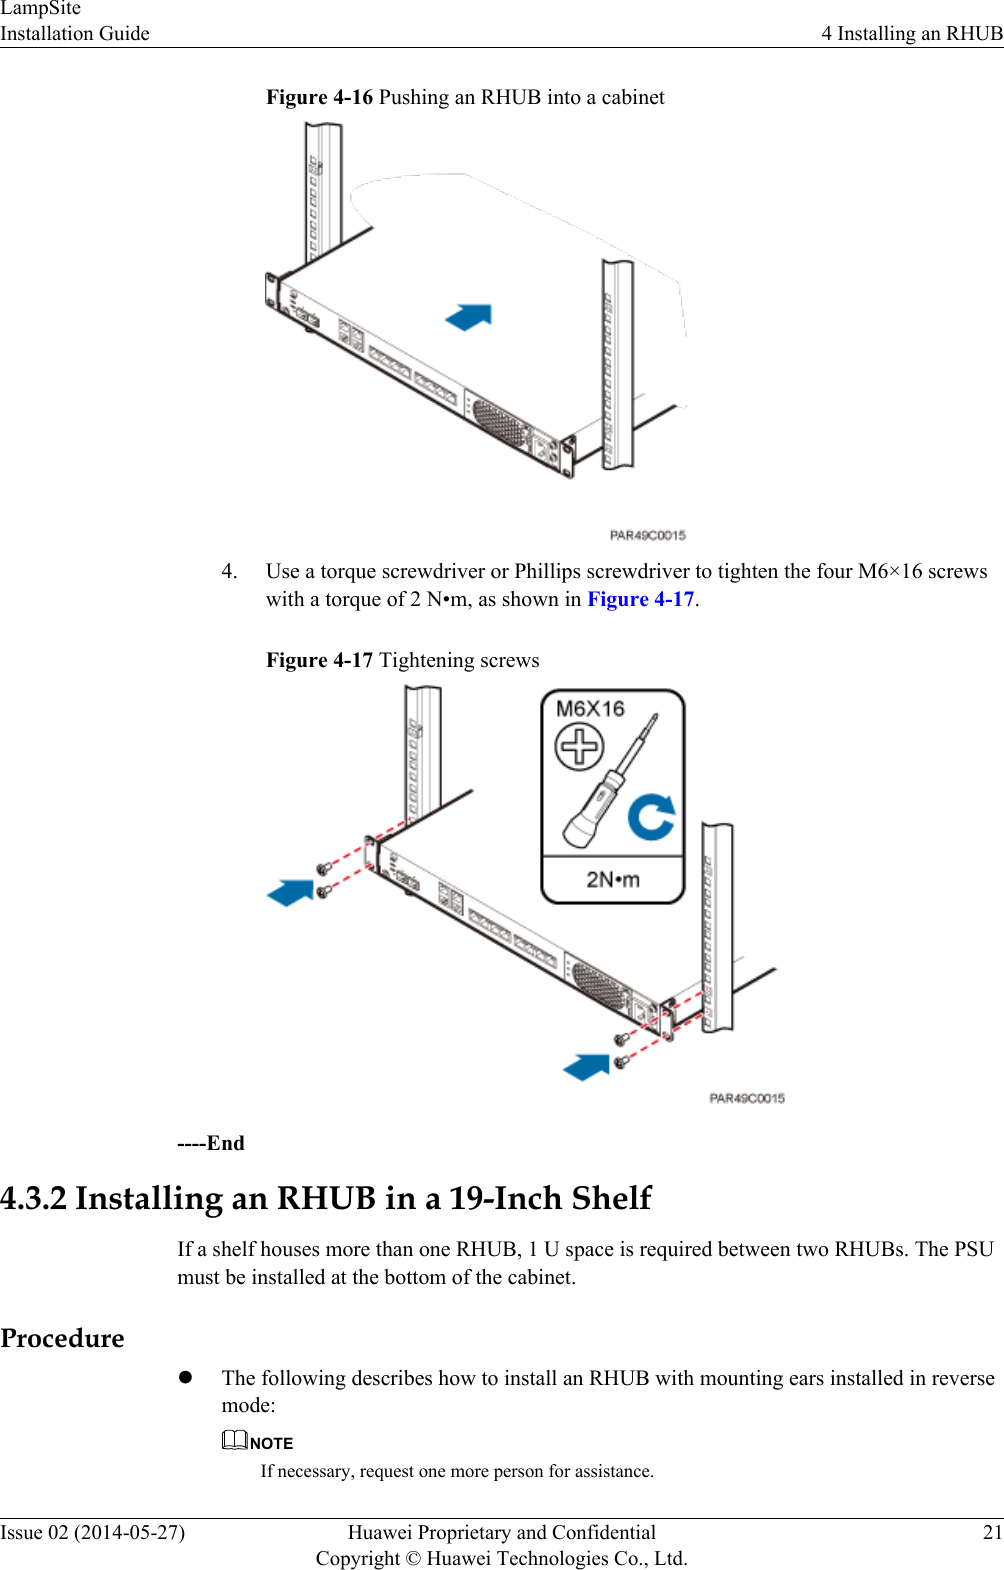 Figure 4-16 Pushing an RHUB into a cabinet4. Use a torque screwdriver or Phillips screwdriver to tighten the four M6×16 screwswith a torque of 2 N•m, as shown in Figure 4-17.Figure 4-17 Tightening screws----End4.3.2 Installing an RHUB in a 19-Inch ShelfIf a shelf houses more than one RHUB, 1 U space is required between two RHUBs. The PSUmust be installed at the bottom of the cabinet.ProcedurelThe following describes how to install an RHUB with mounting ears installed in reversemode:NOTEIf necessary, request one more person for assistance.LampSiteInstallation Guide 4 Installing an RHUBIssue 02 (2014-05-27) Huawei Proprietary and ConfidentialCopyright © Huawei Technologies Co., Ltd.21